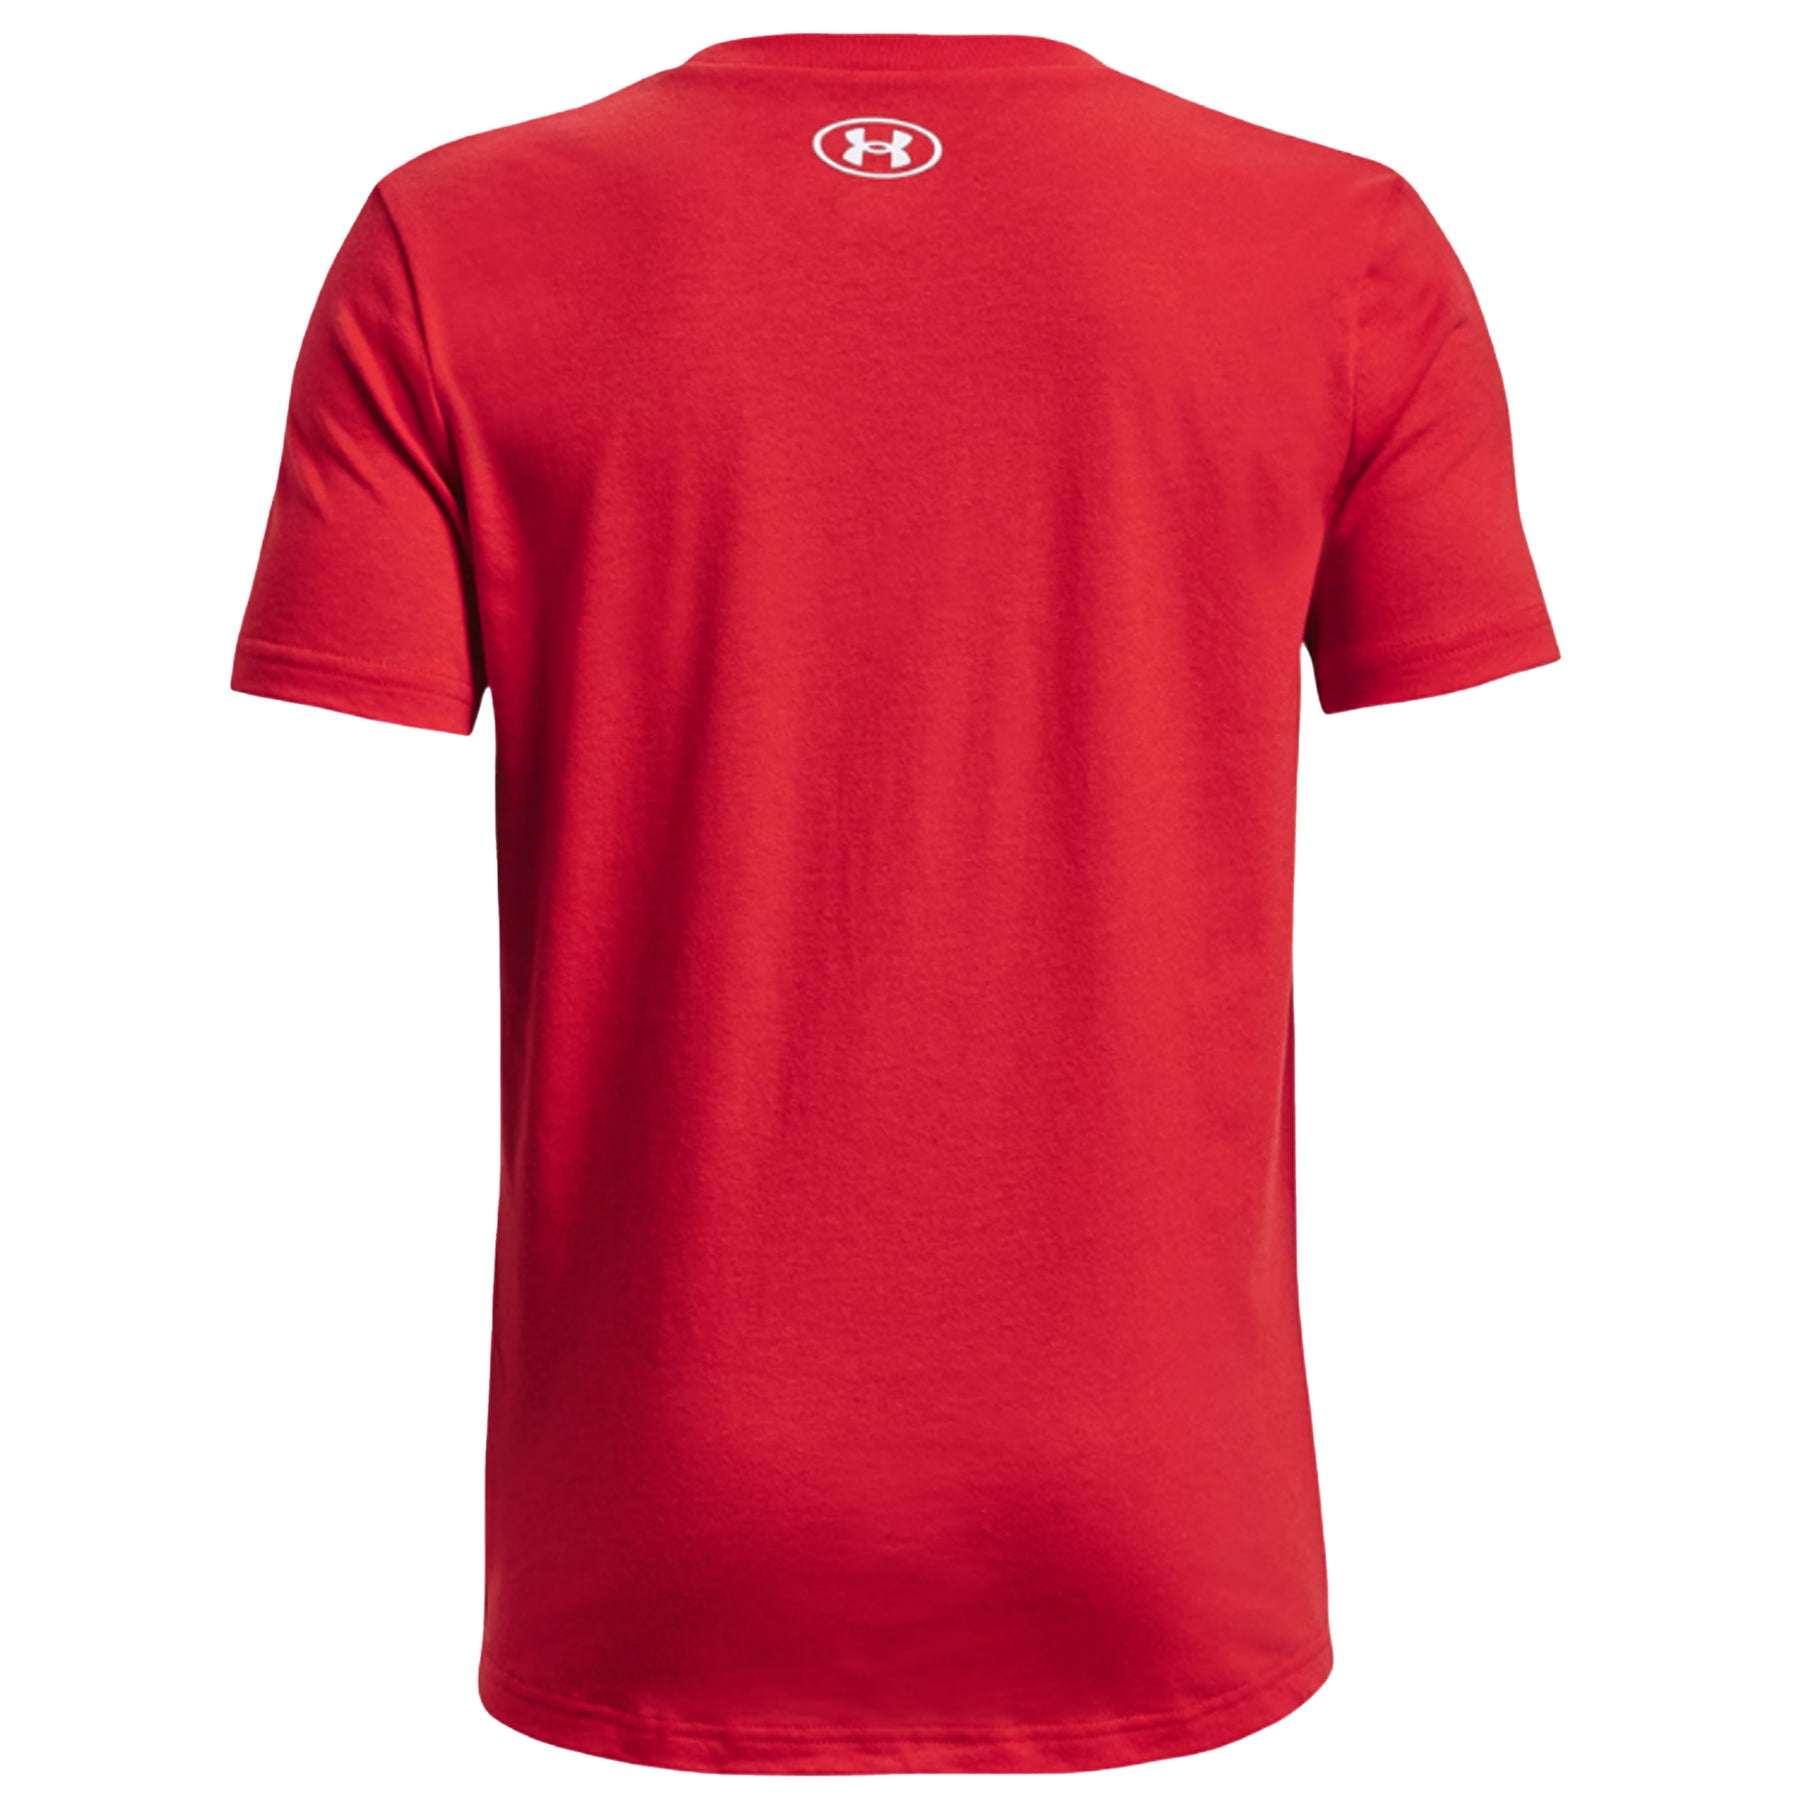 Under Armour Youth Sportstyle Tee Large Logo: Red/White